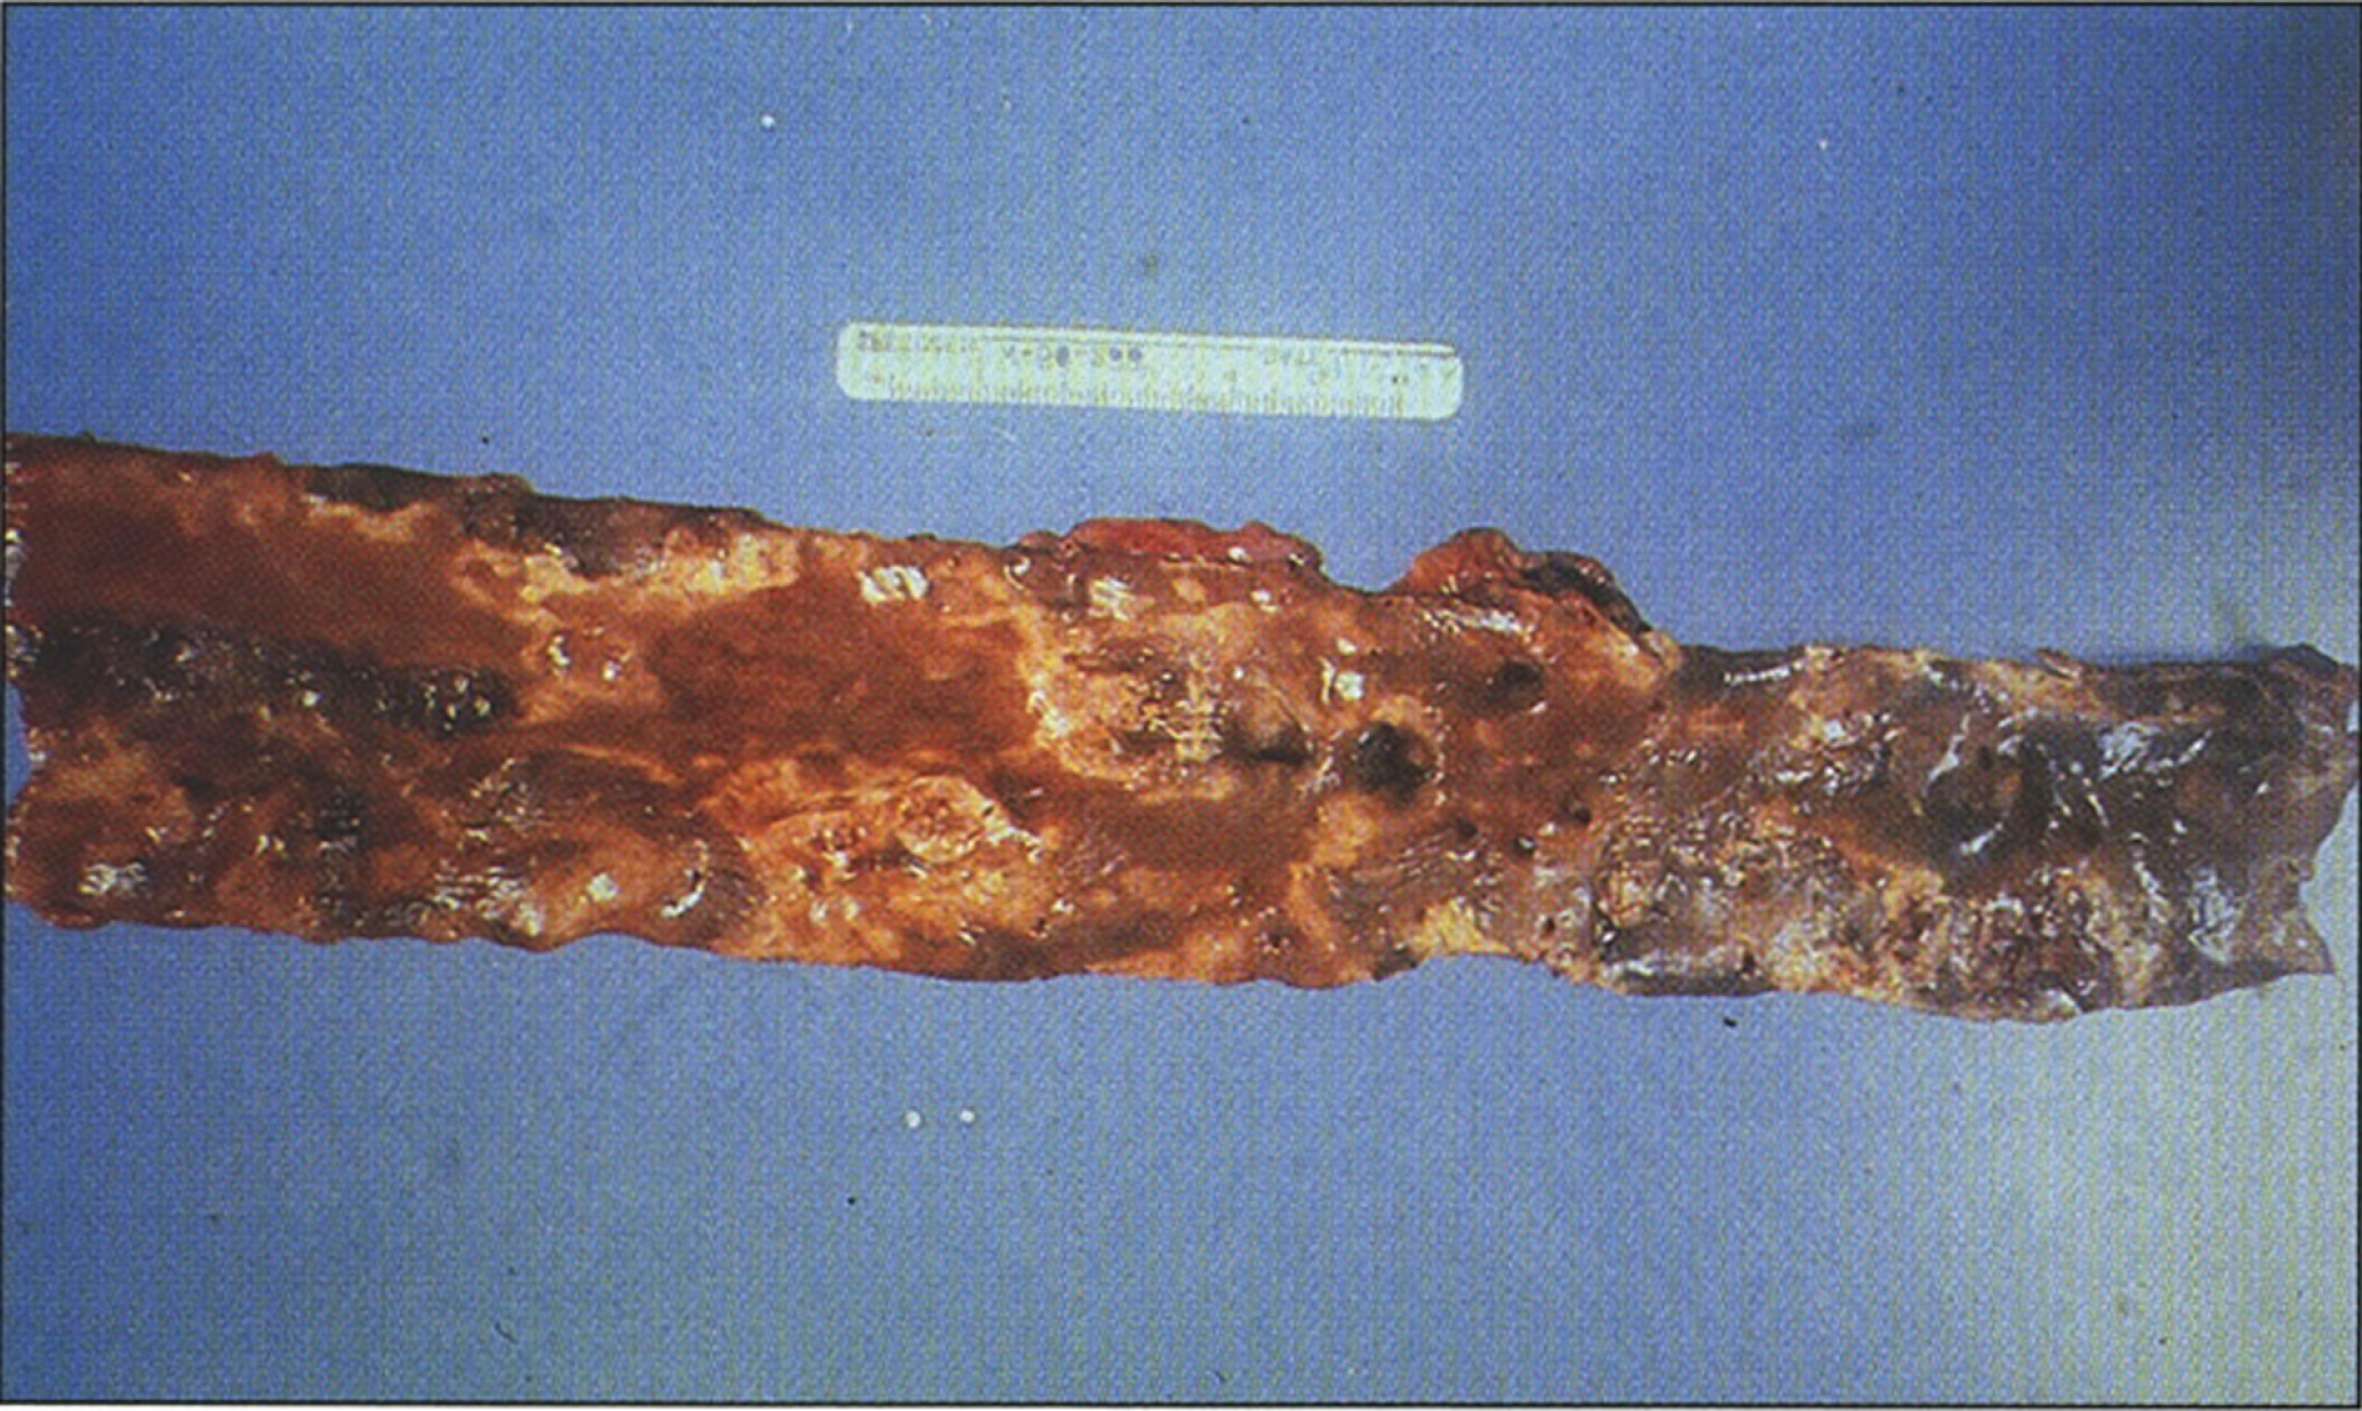 Alkaptonuria- A segment of the aorta showing pigmented atherosclerotic plaques. The presence of the pigment augments and accelerates the atherosclerotic process. (Figure 21 in the first book).